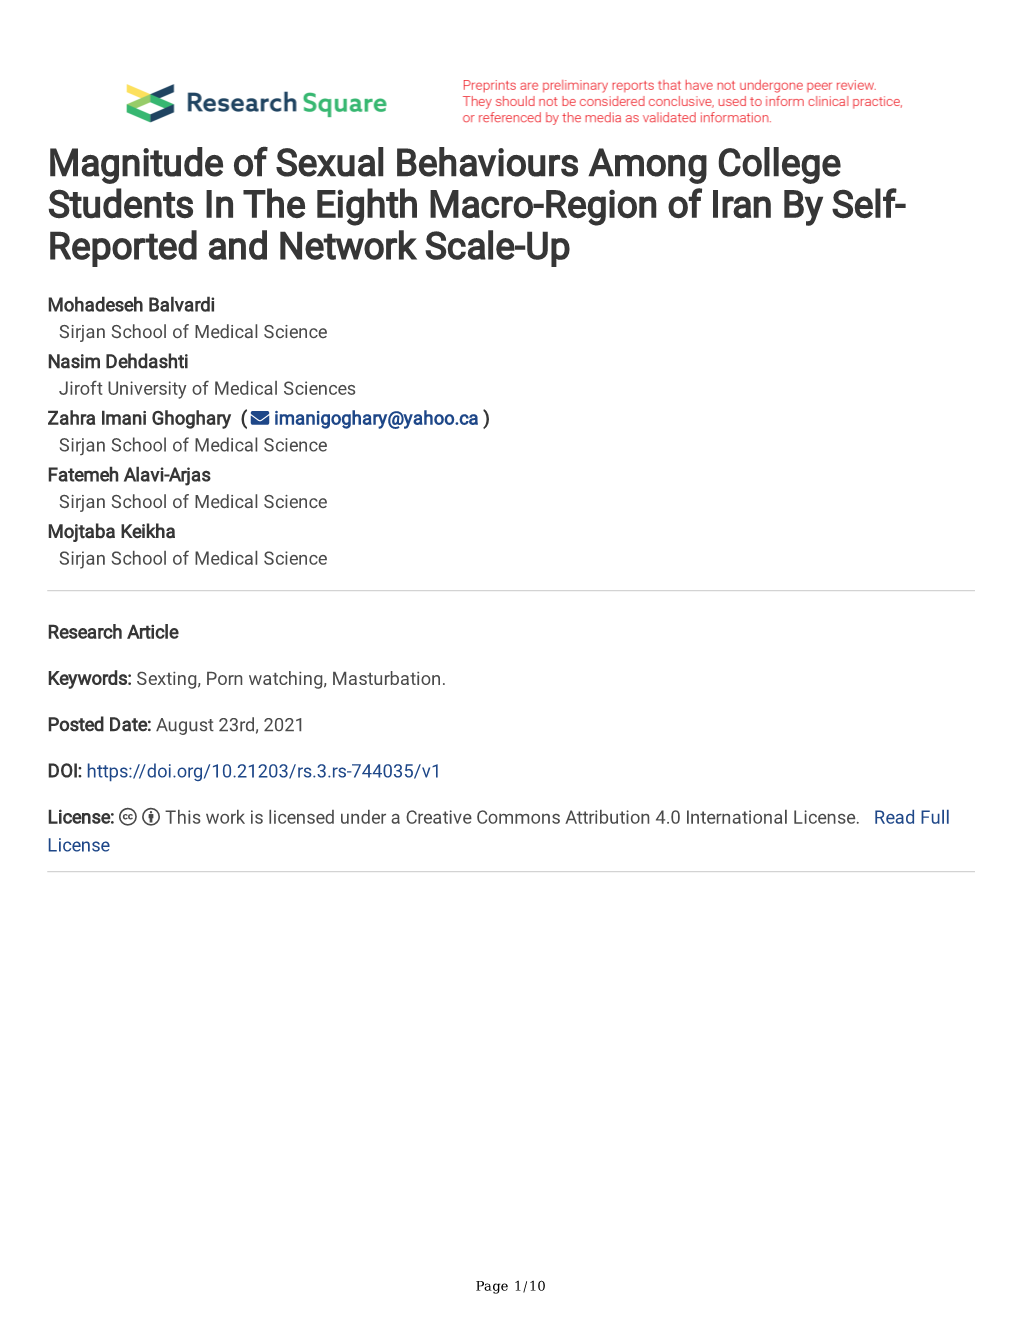 Magnitude of Sexual Behaviours Among College Students in the Eighth Macro-Region of Iran by Self- Reported and Network Scale-Up